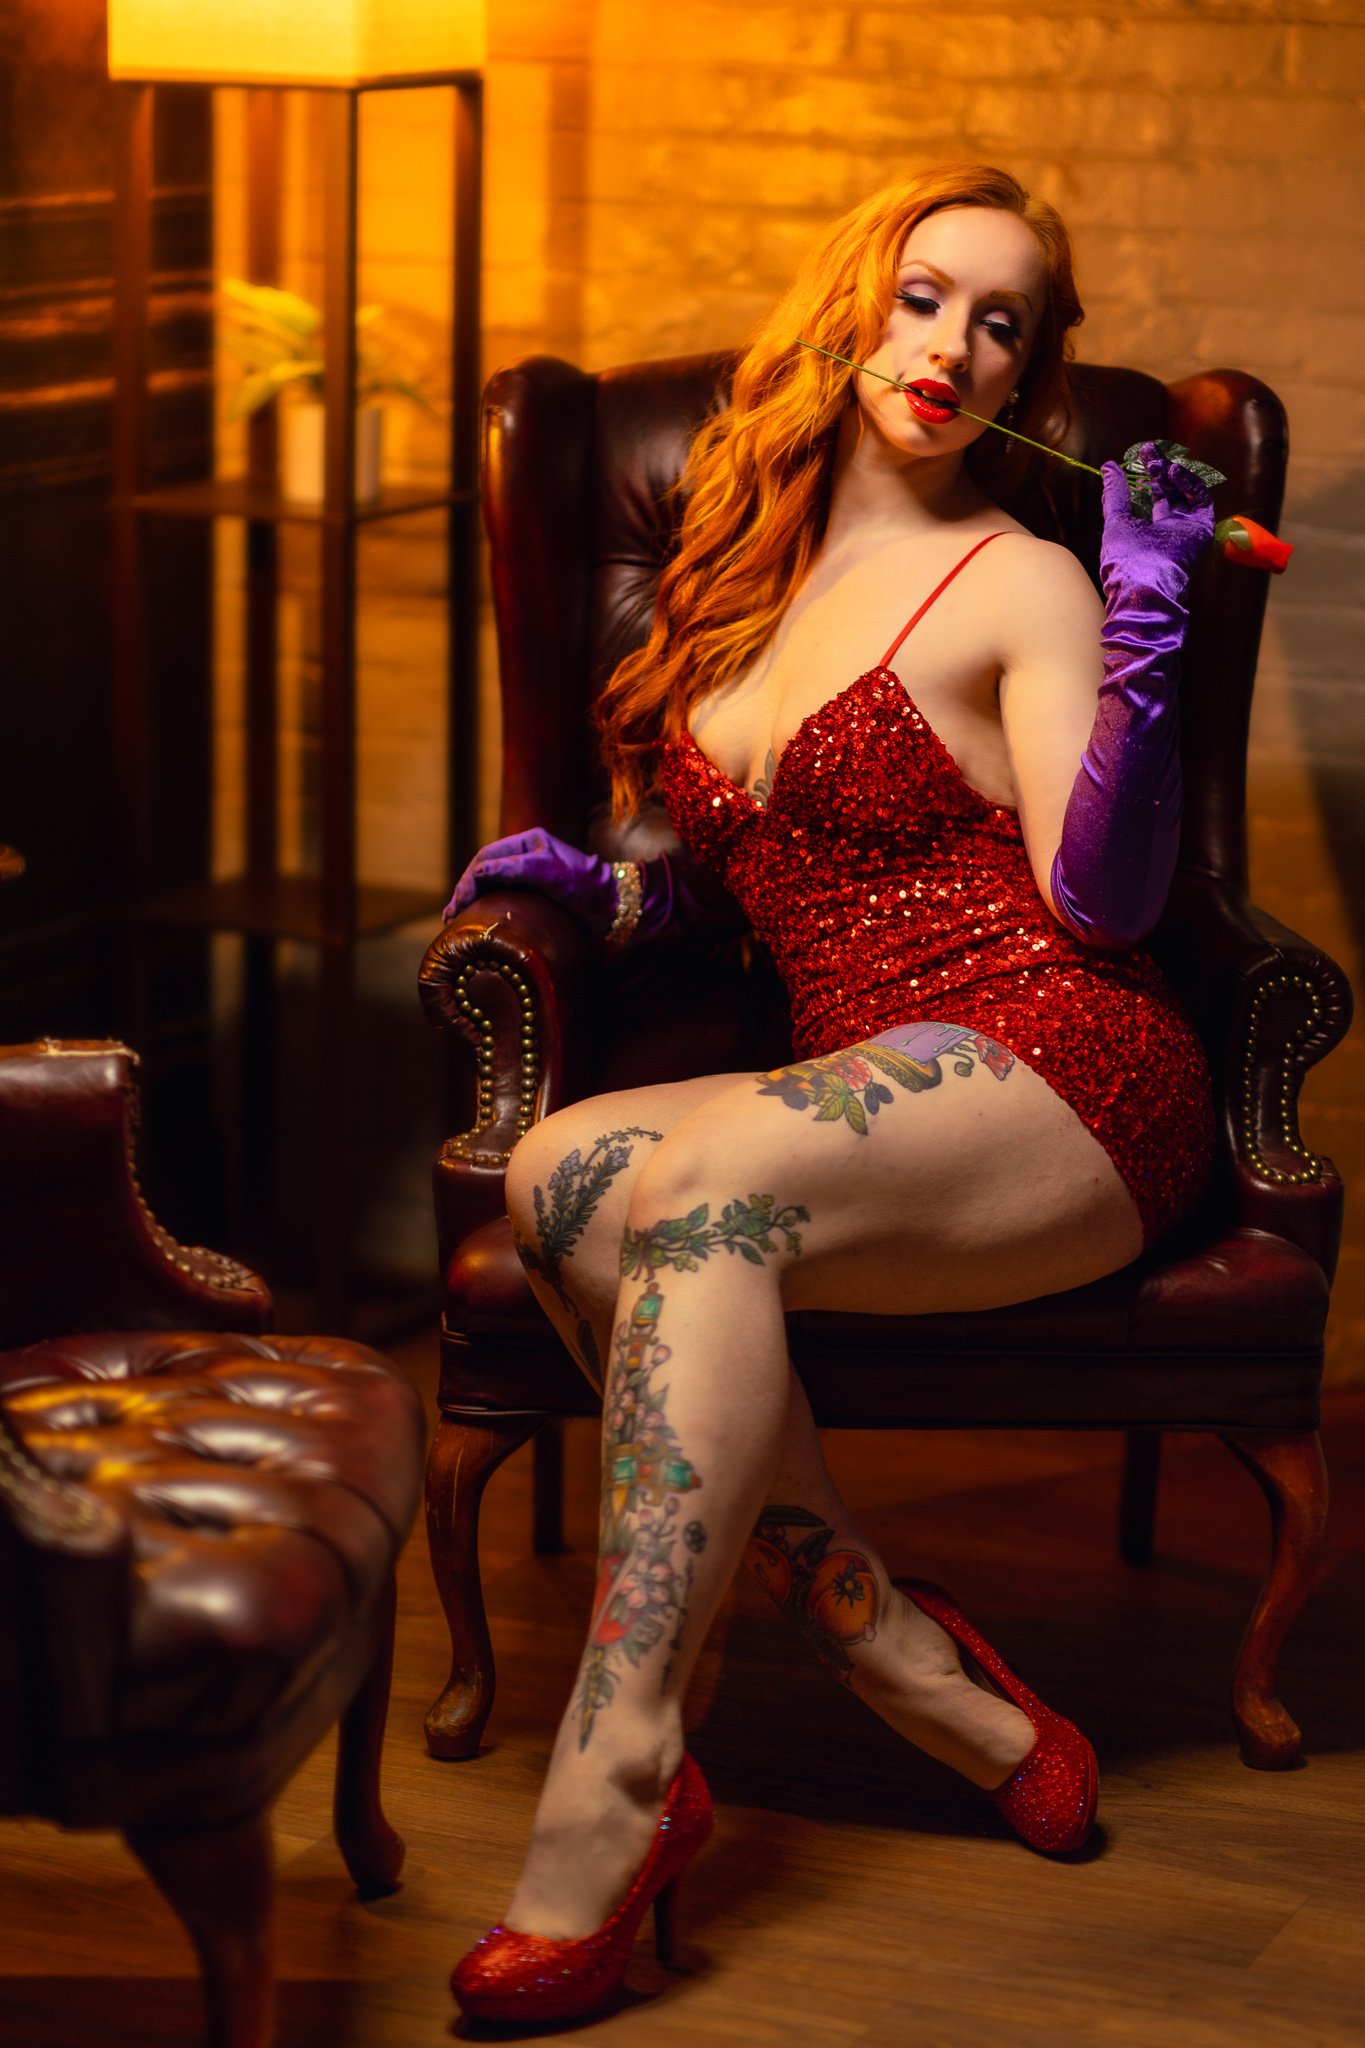 a glamour glamour photo of jessica rabbit with a rose in her mouth sitting in a a chair with tattoos by photographer yohance bailey based in binghamton new york  serving ithaca syracuse upstate new york.jpg